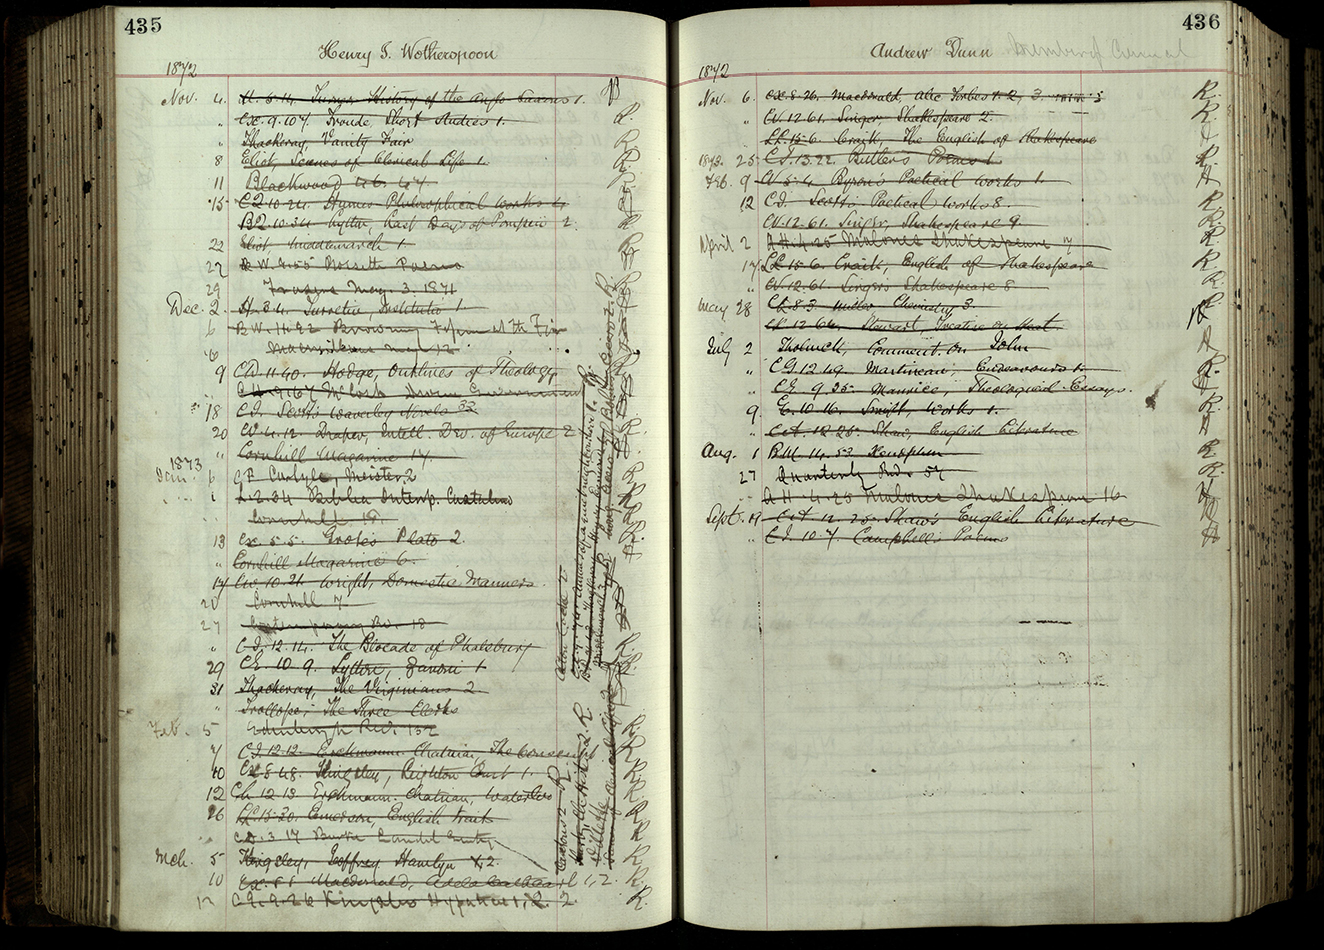 A student Library Receipt Book from 1869-1881. Borrowed books were listed under the reader’s name, and then scored out when returned. As today some students read much more than others, for it can be seen that Wotherspoon borrowed many more books than Dunn in the 1872/73 session (UYLY207/20).